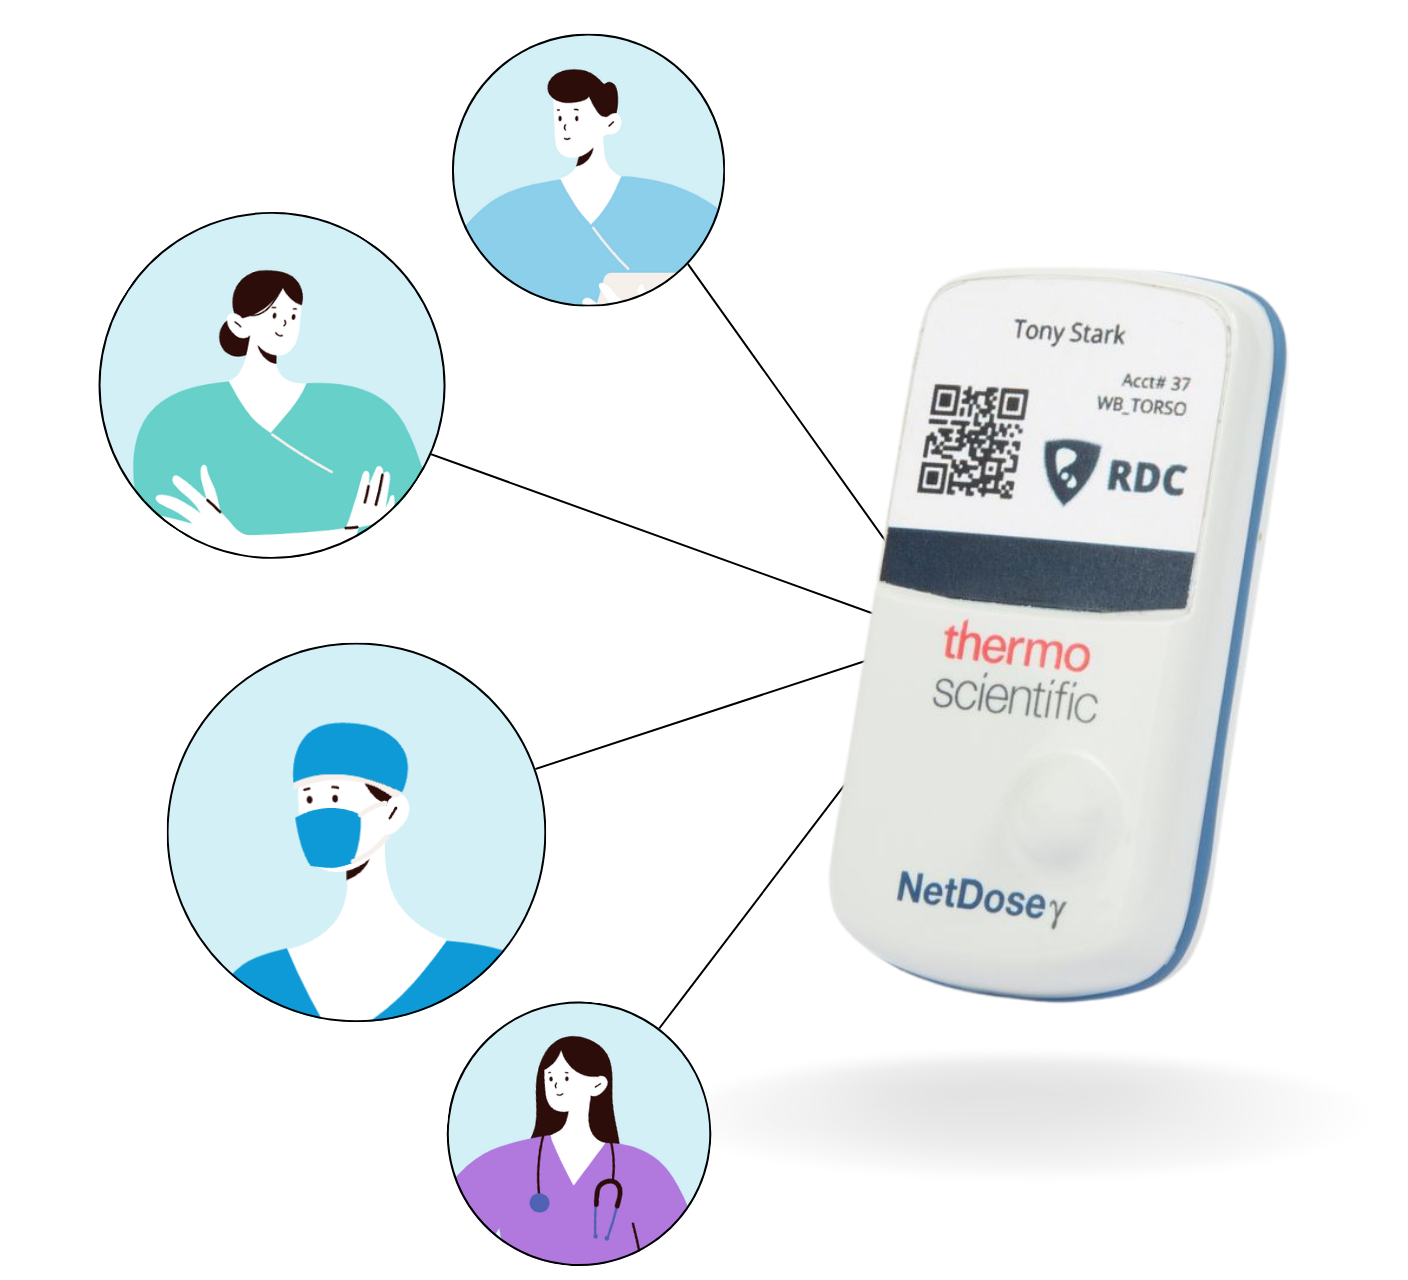 An image of the NetDose Digital Dosimeter surrounded by illustrations of professionals who would benefit from wearing the badges such as doctors and veterinarians.